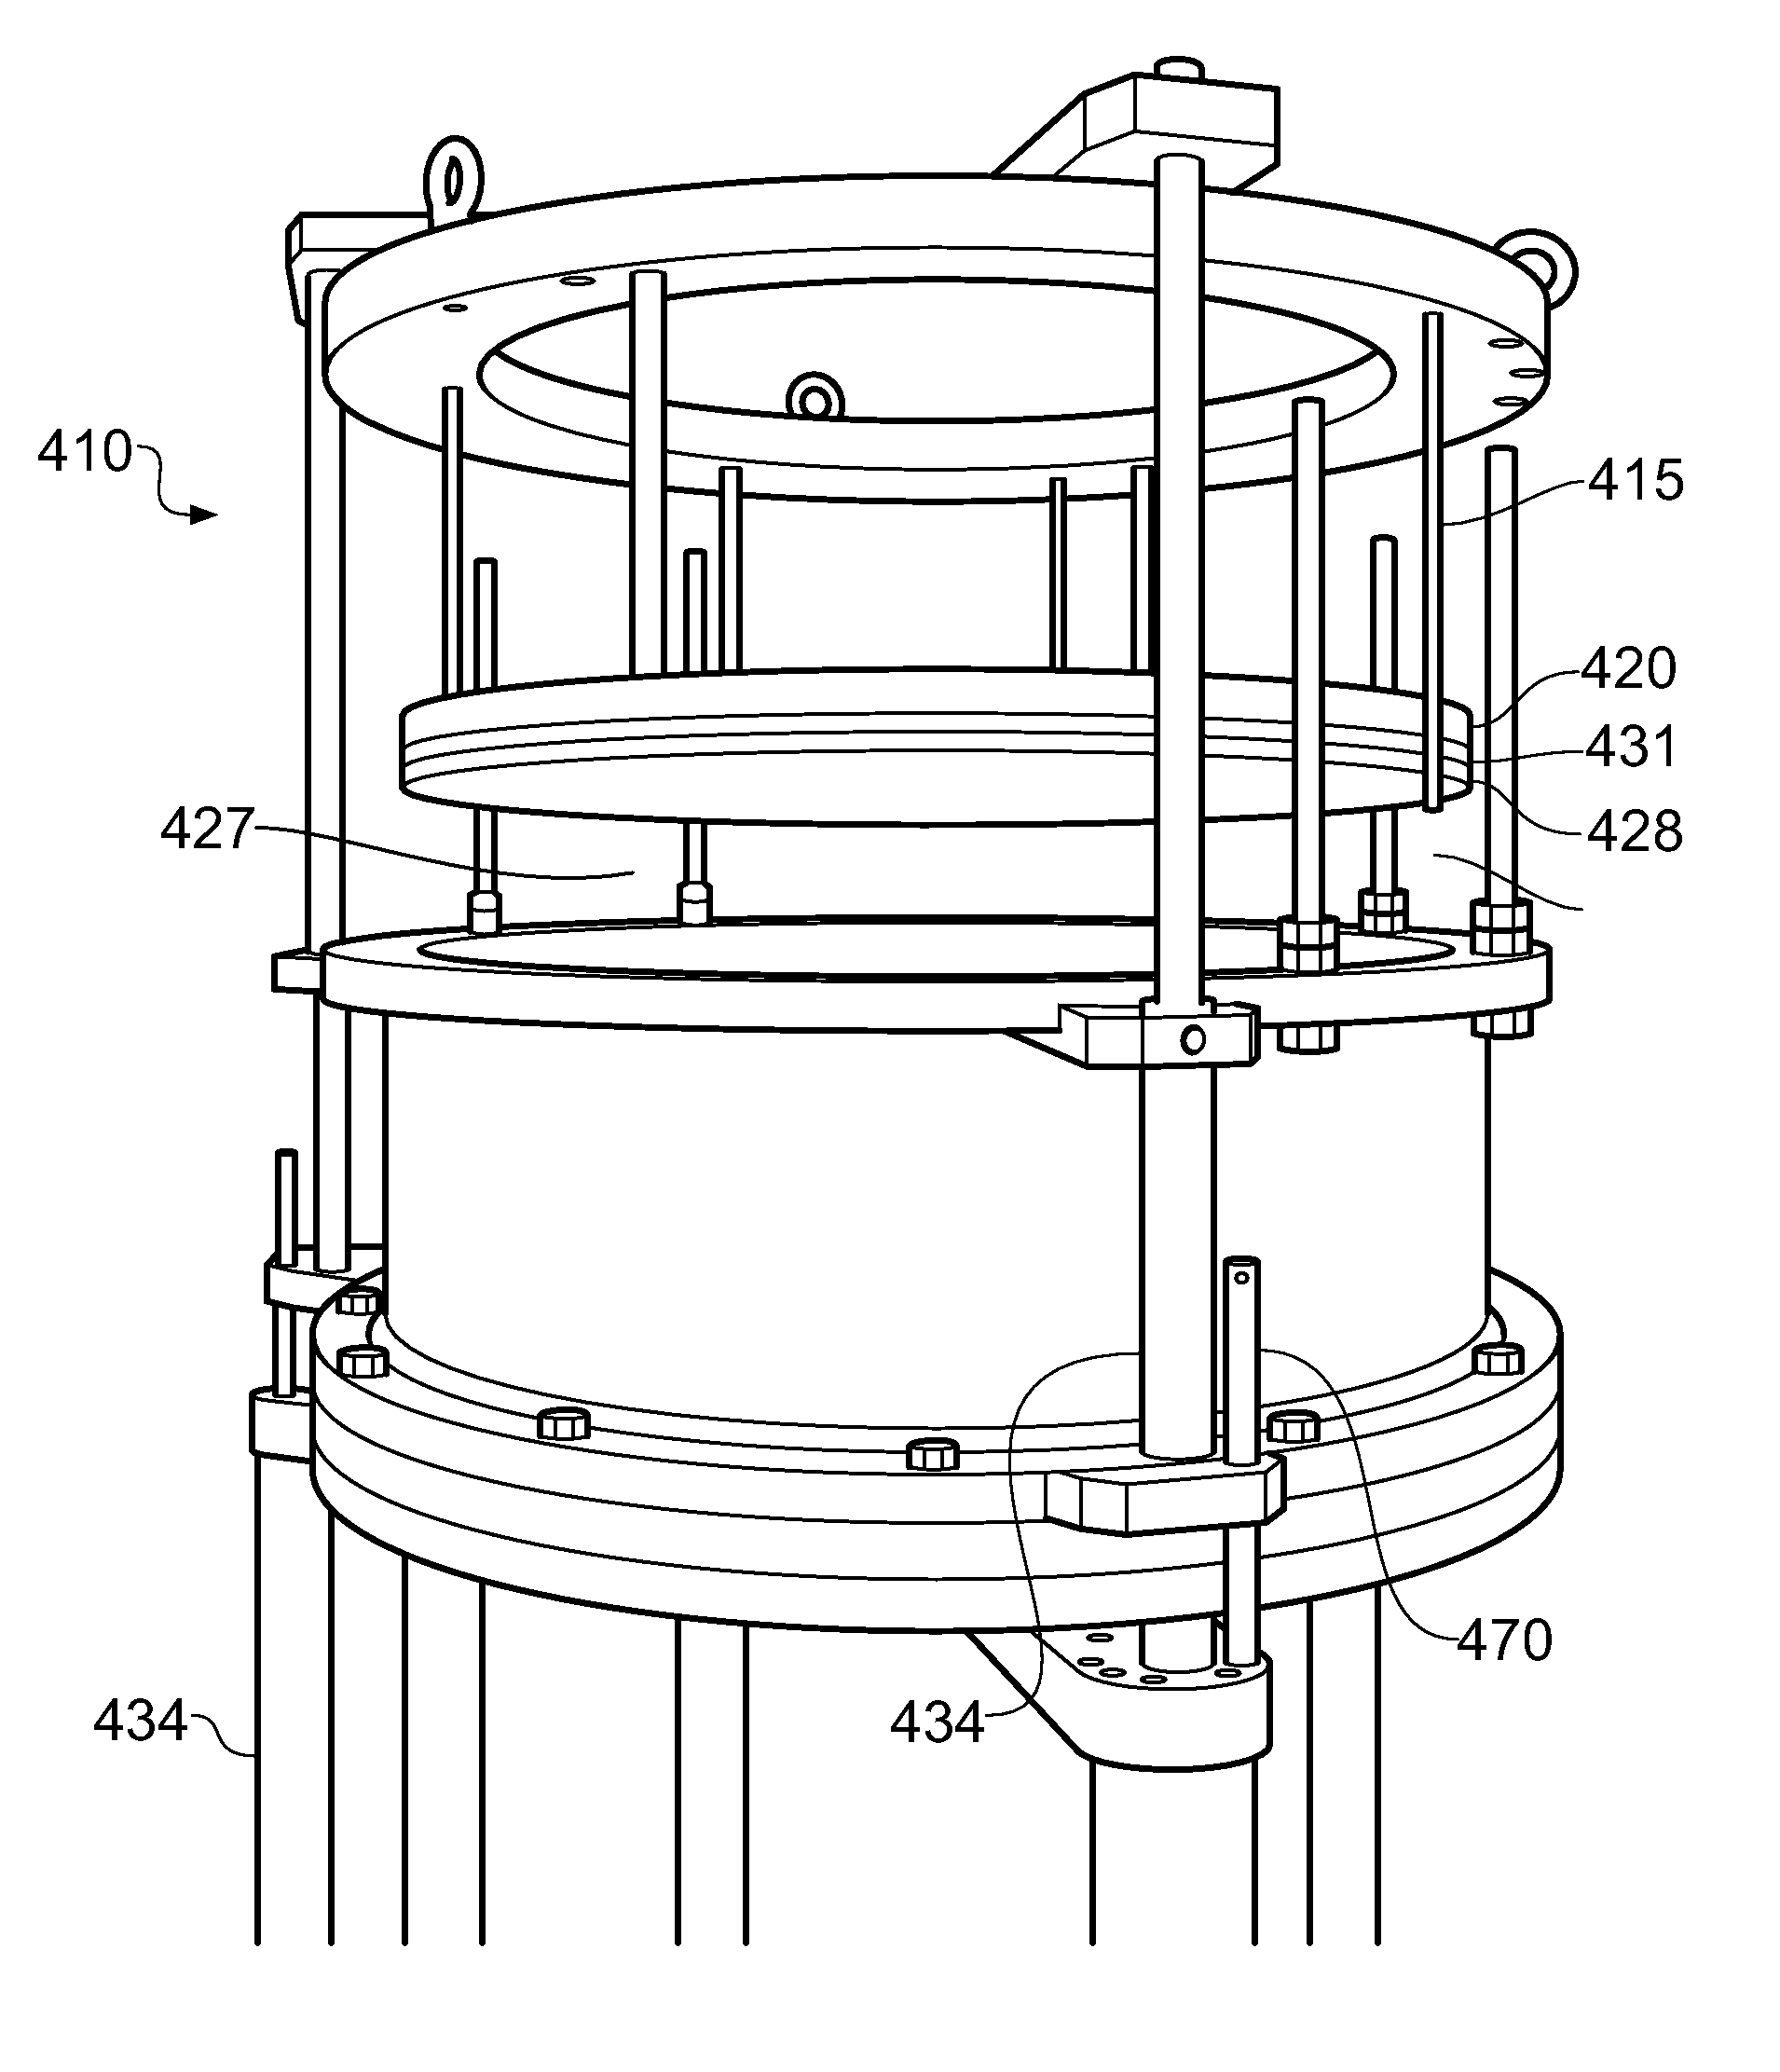 Method for conducting maintenance on a chromatography column